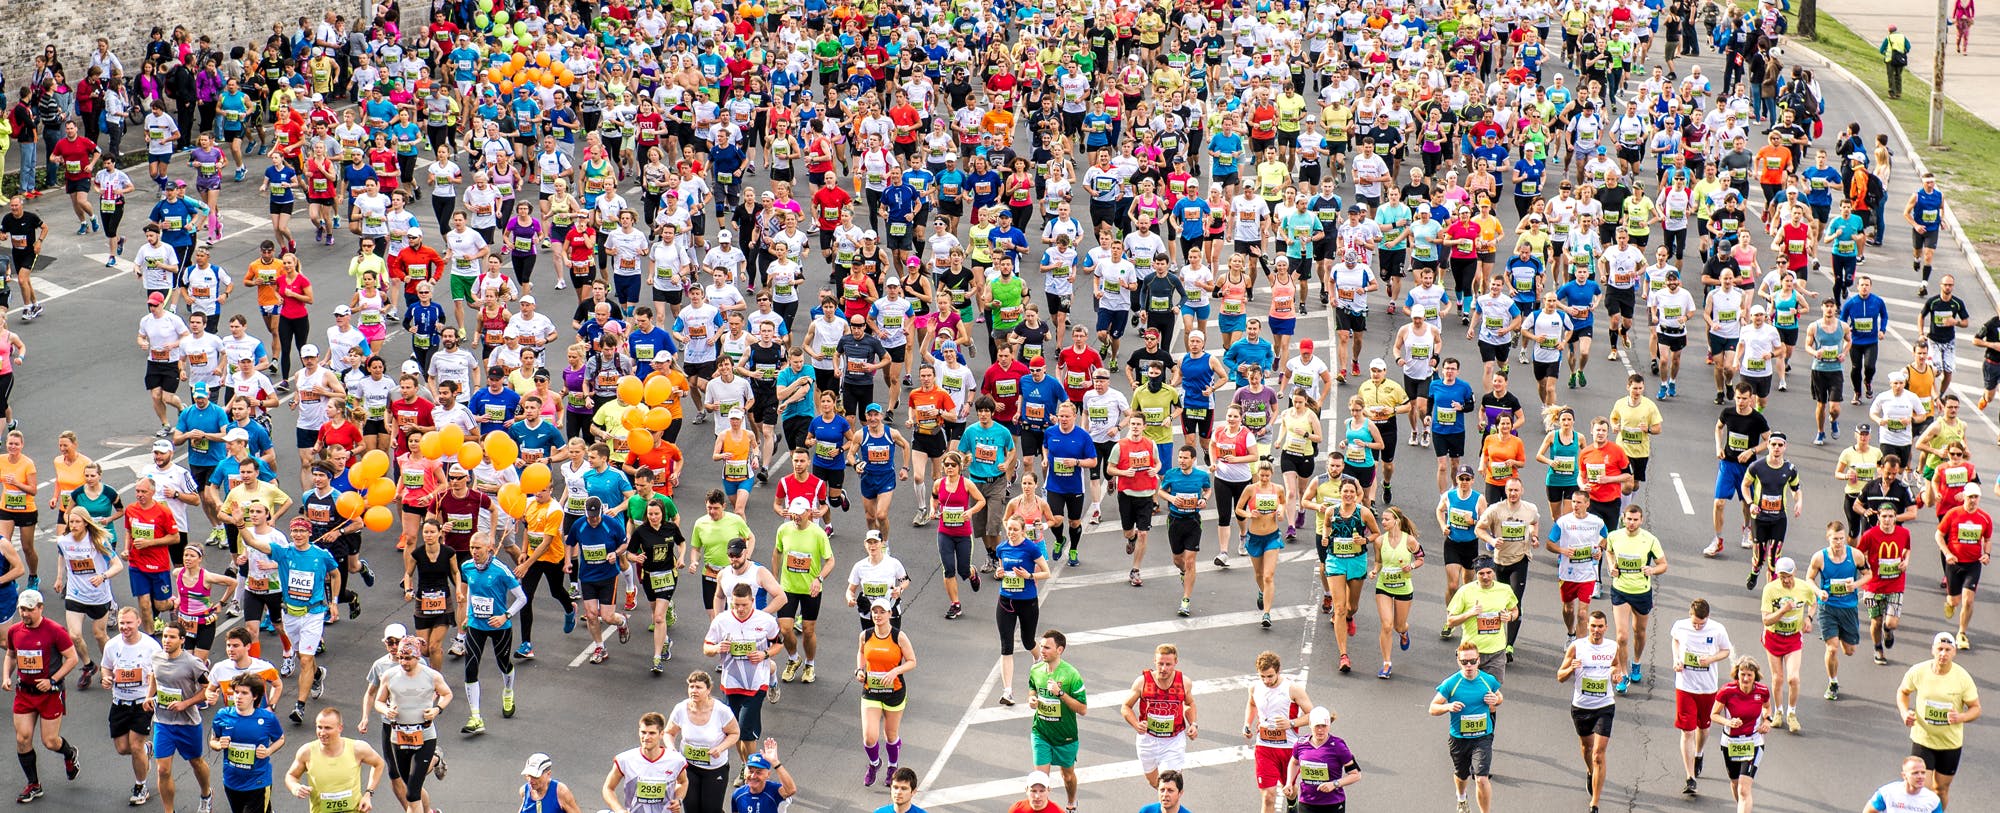 26.2 Race Training Tips For First-Time Marathoners: Part 3 - Dress for Success